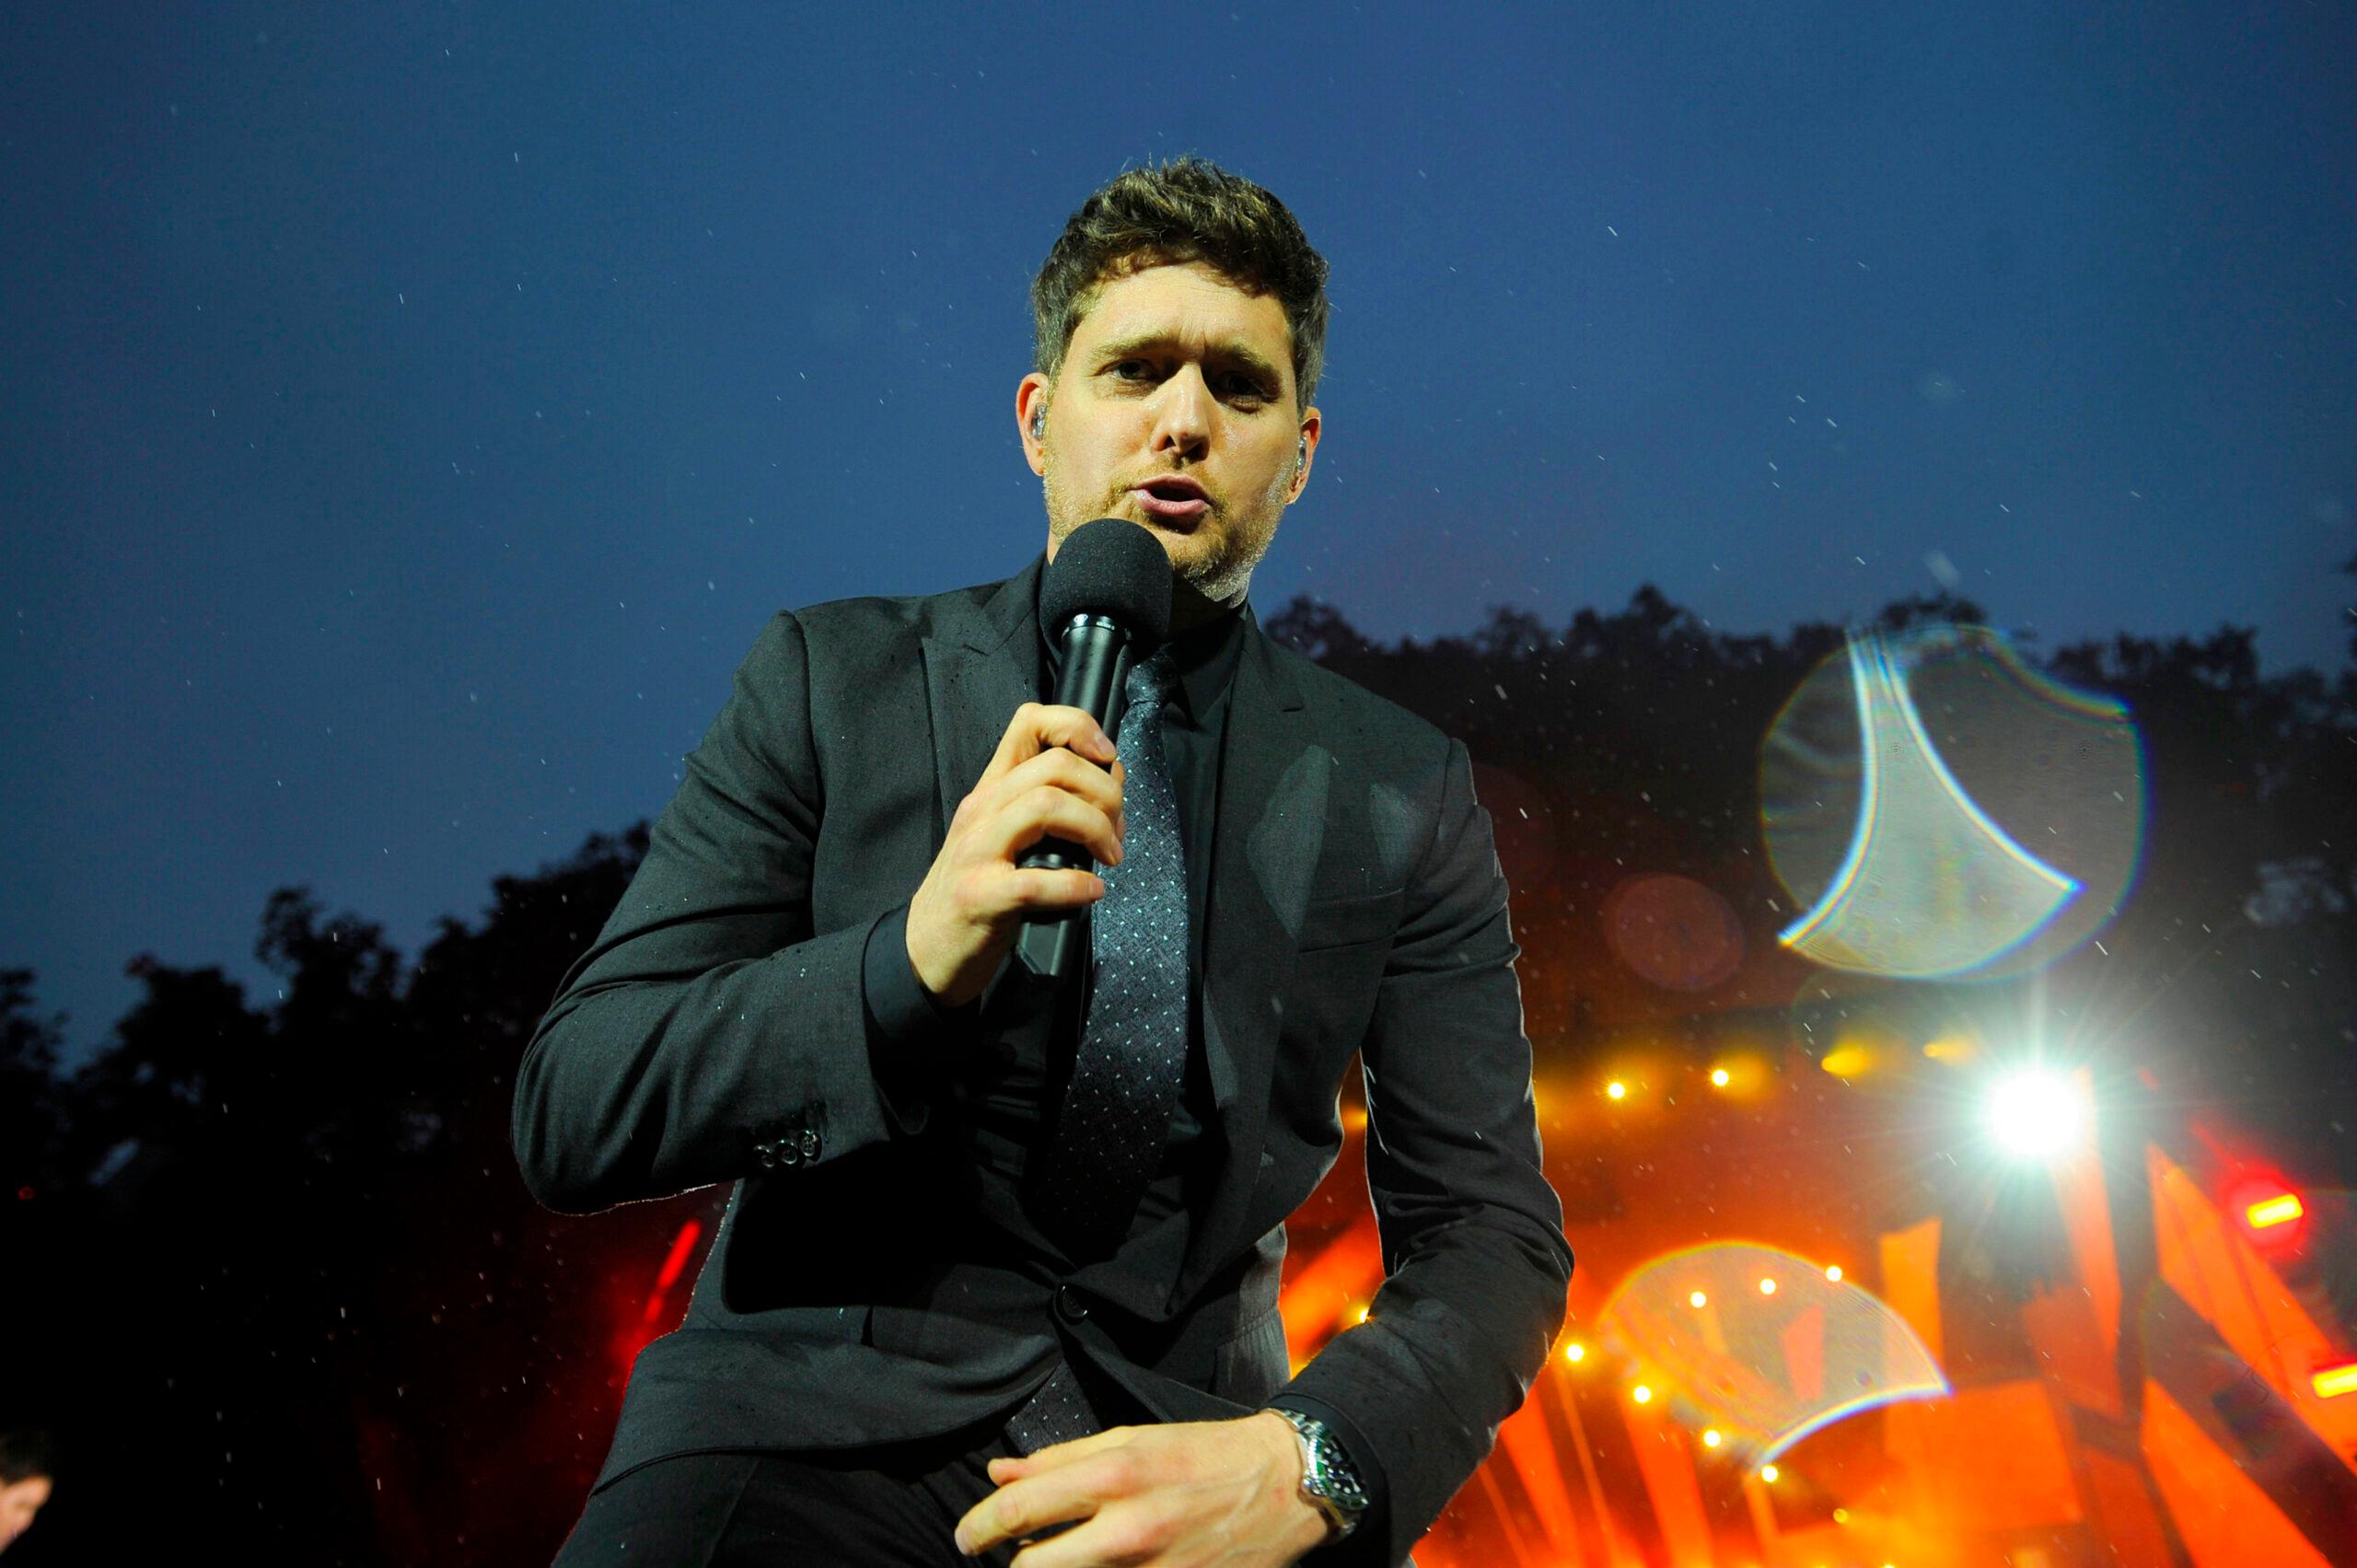 Michael Buble performing at British Summer Time 2018